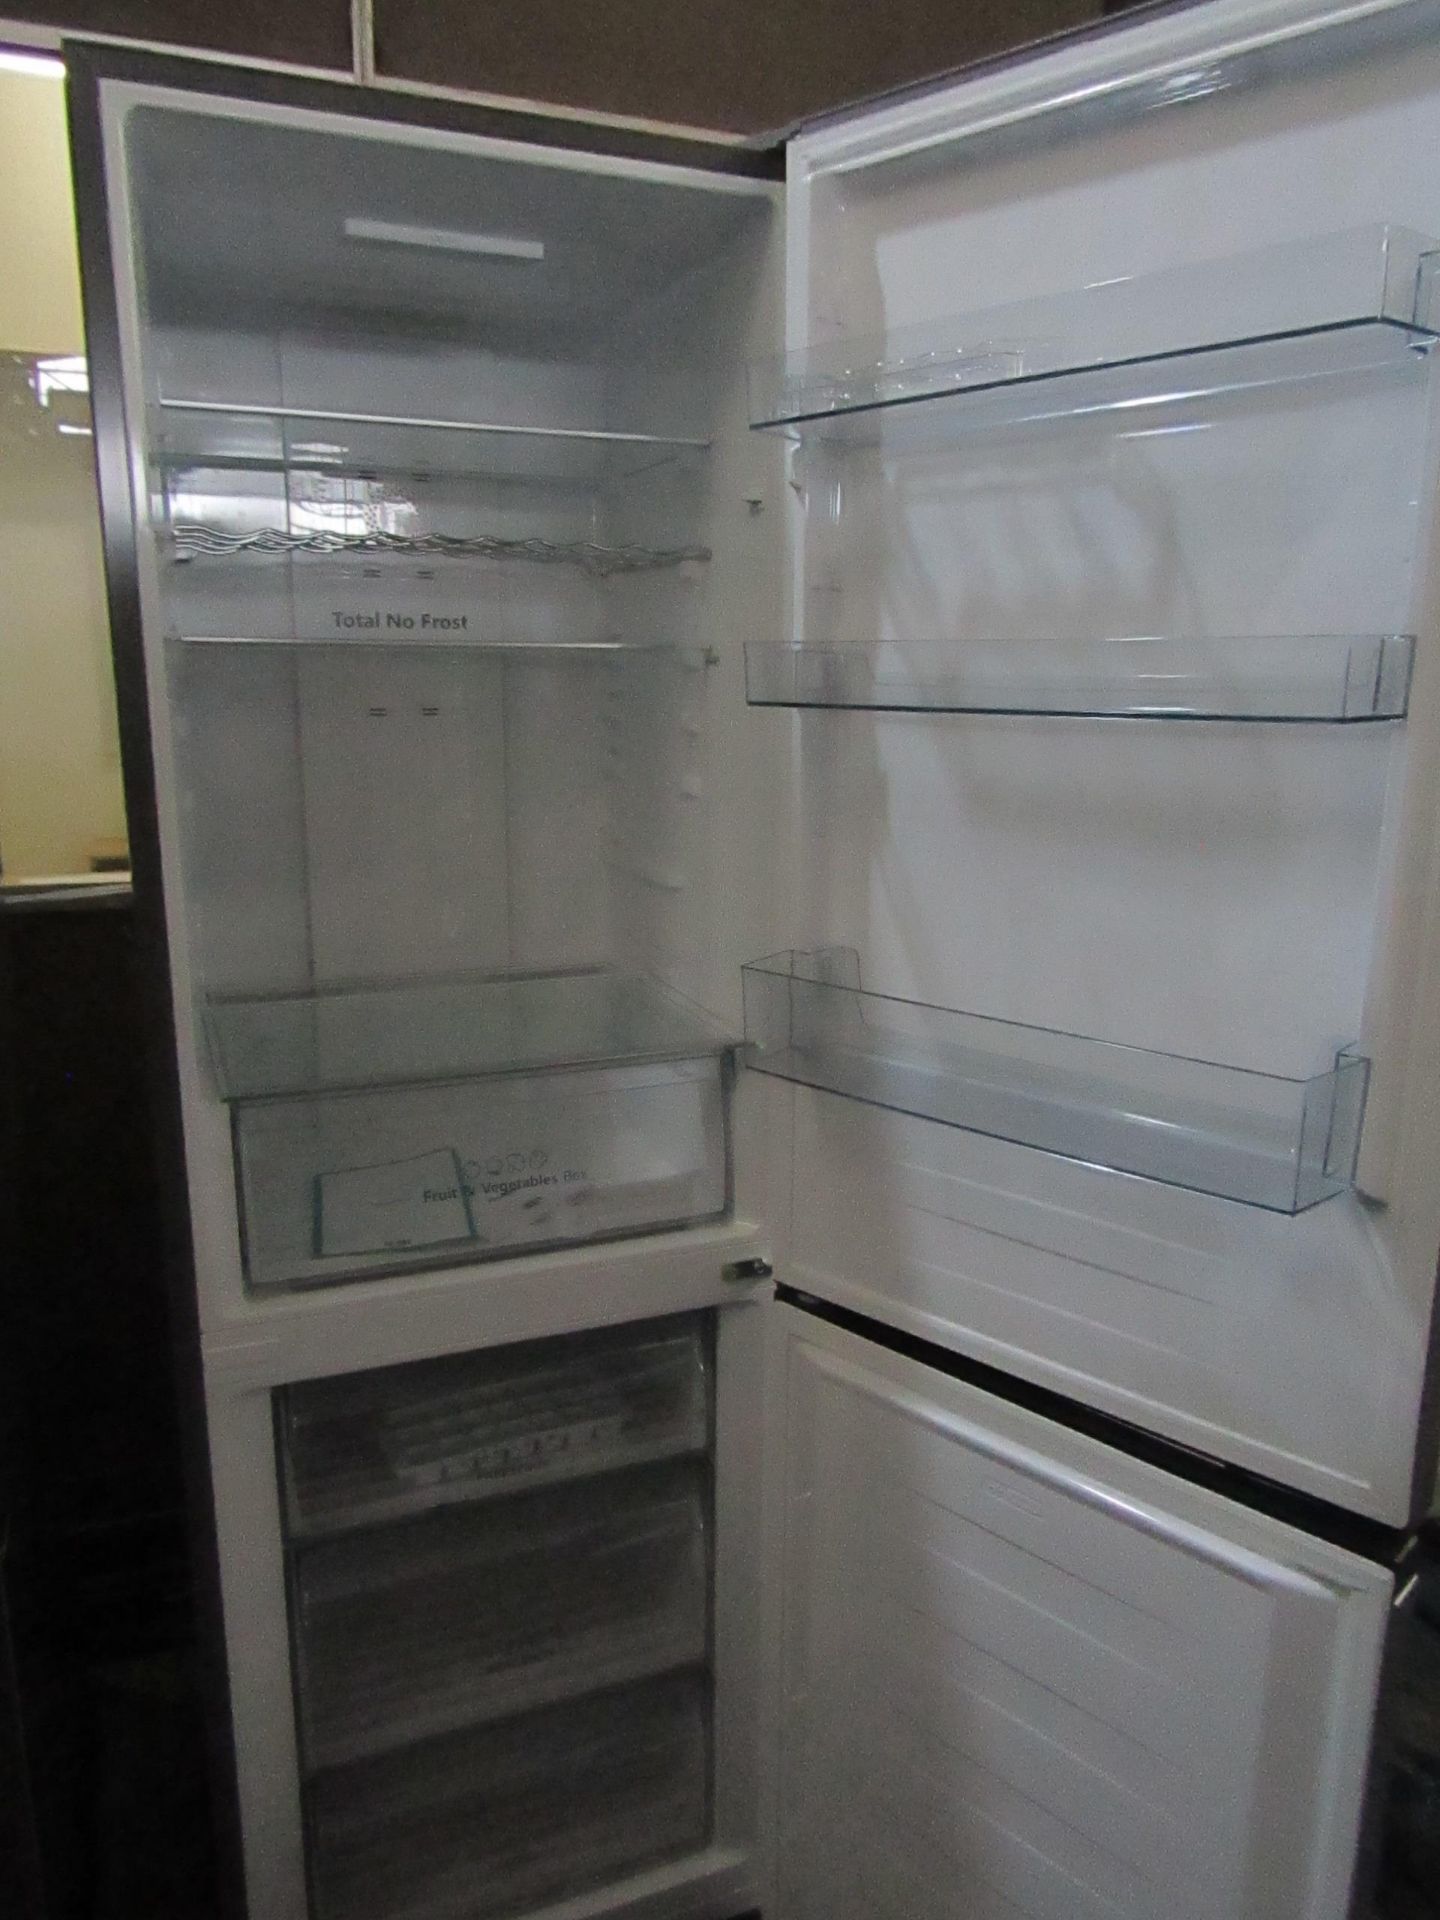 Hisense 60/40 fridge freezer, clean inside and a couple of small dents on the fridge door, tested - Image 2 of 2